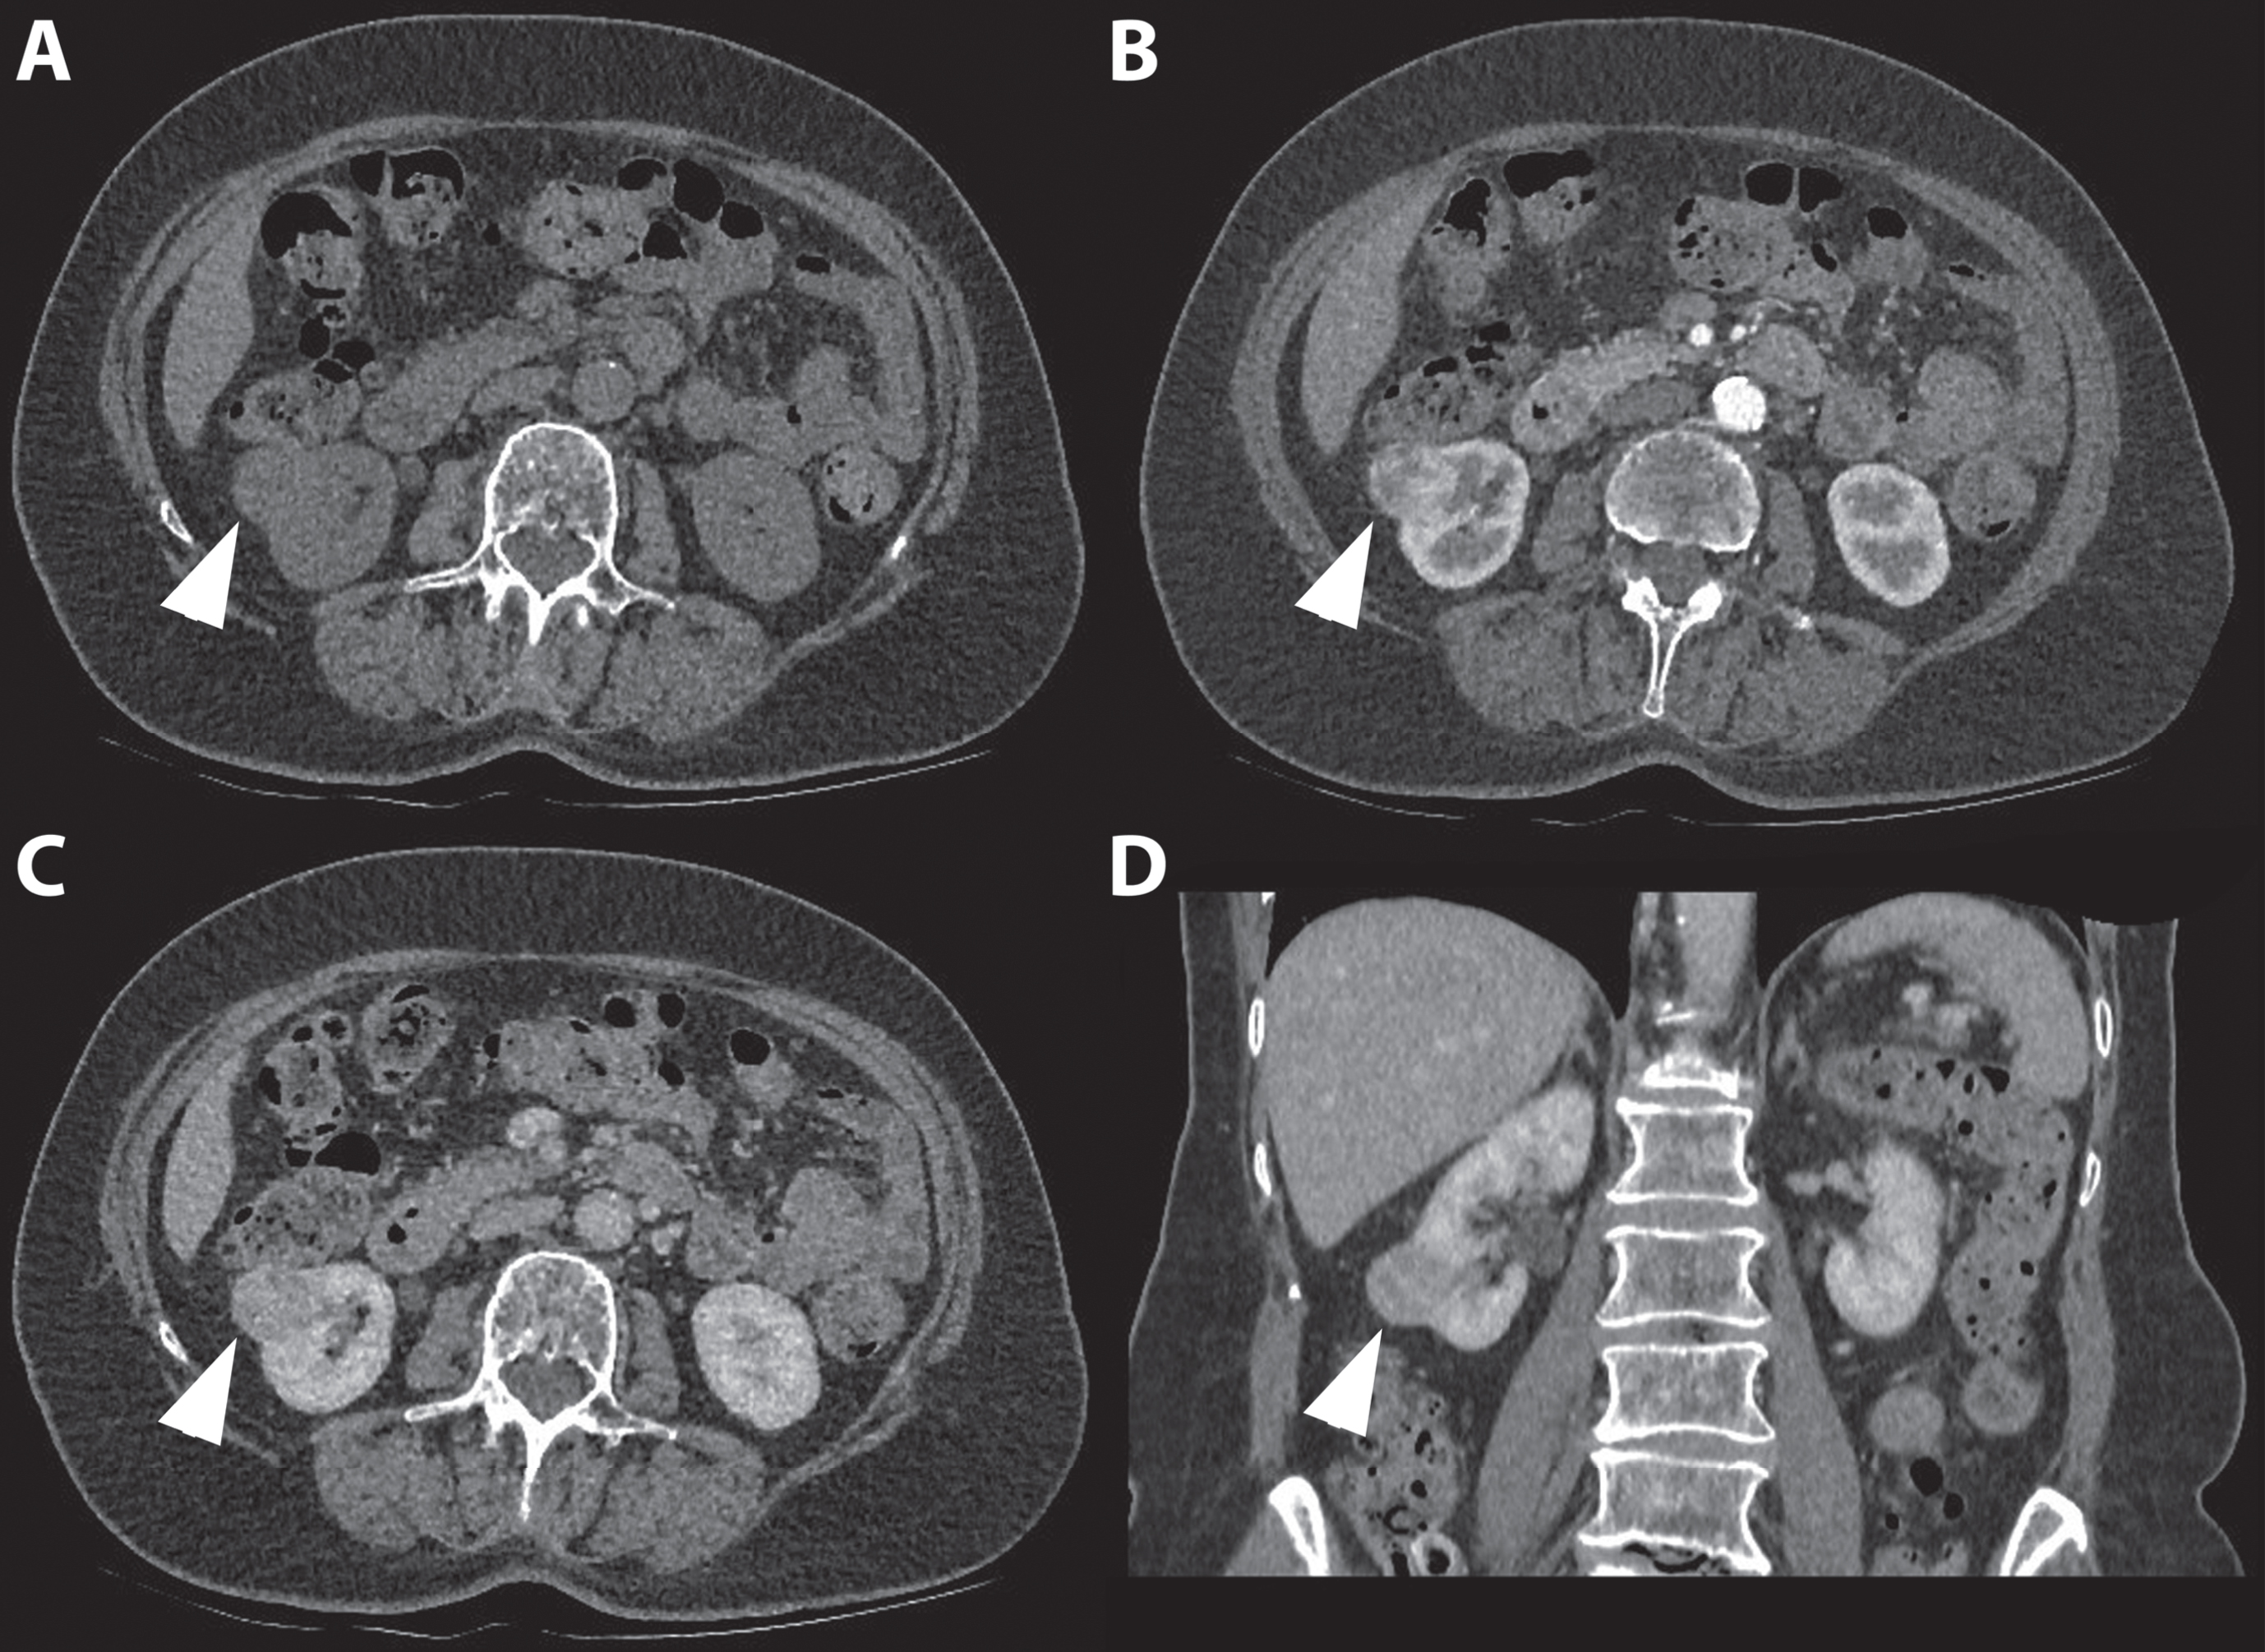 An 80-year-old women was referred for an incidentaloma of the right kidney detected on ultrasound. A 3 phase CT scan showed an isoattenuating, exophytic growing renal tumor of the right lower pole on the non-contrast phase. (A) An inhomogeneous avid enhancement pattern is seen in the corticomedullary phase (B) followed by wash out during the nephrogenic phase (C and D). The patient was treated with percutaneous image-guided cryoablation. Intraoperative biopsy specimens showed an oncocytoma.